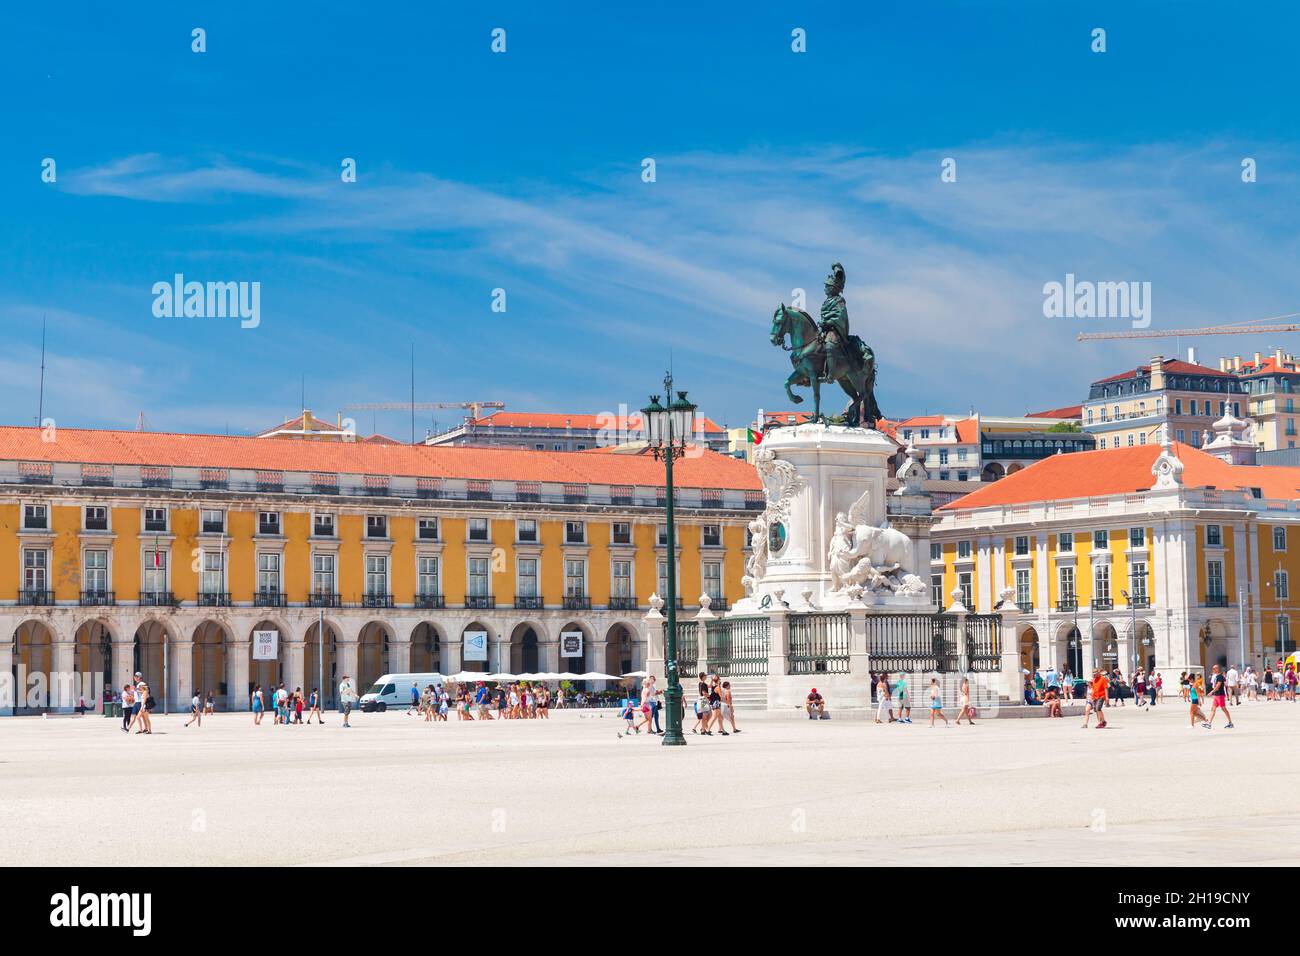 Lisbon, Portugal - August 12, 2017: Commerce Square view on a sunny day with tourists walk near the Statue of King Jose I, by Machado de Castro built Stock Photo